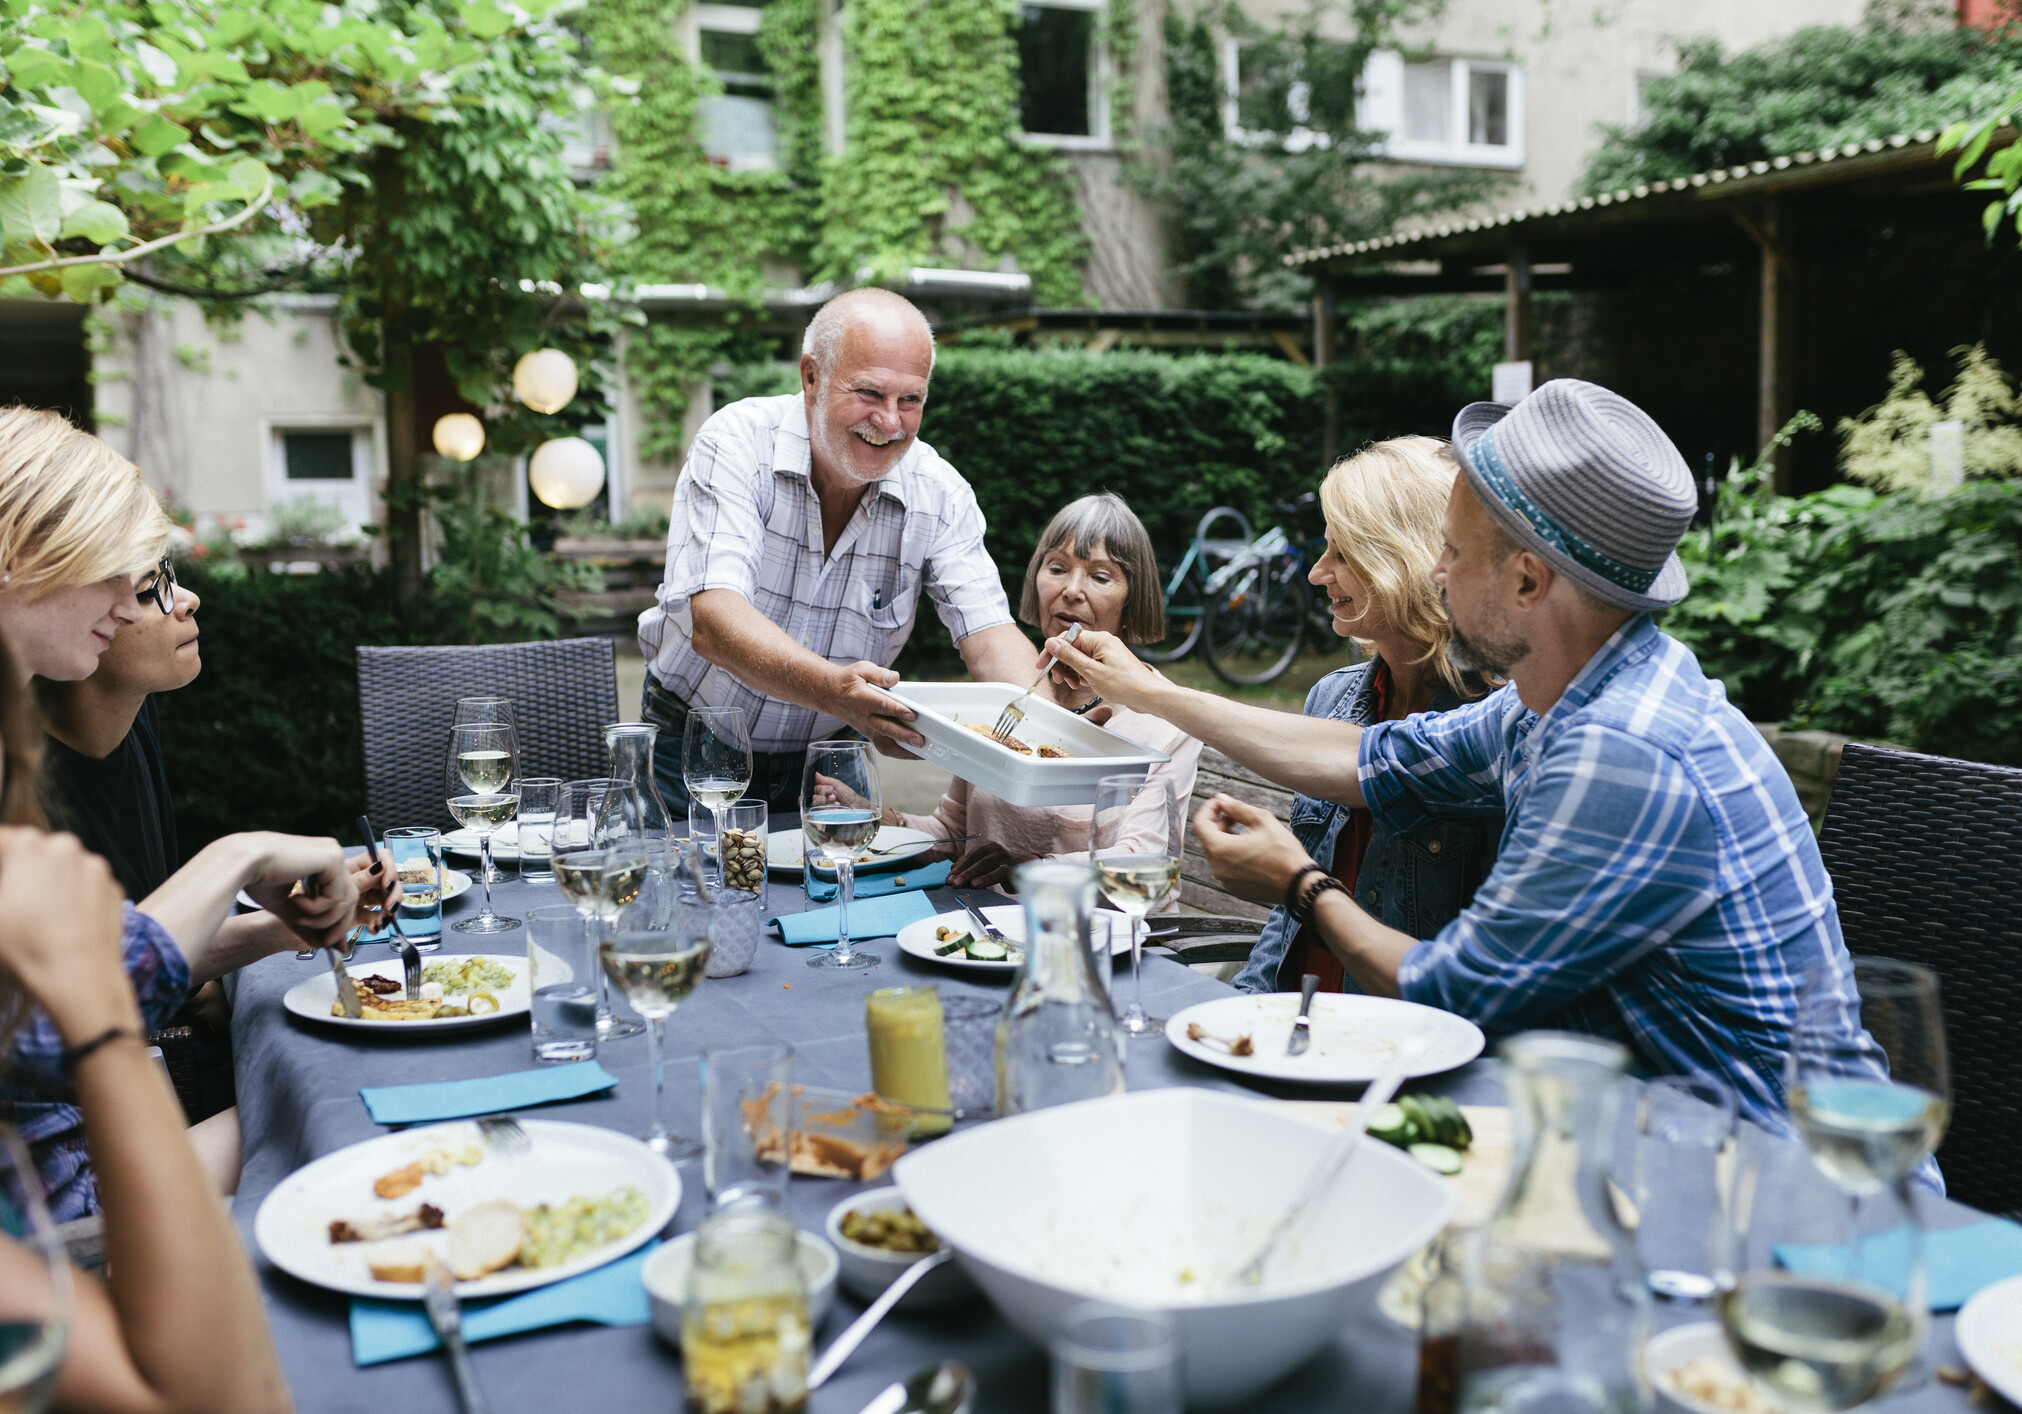 A family sharing food at a large table during a barbecue in a courtyard together.